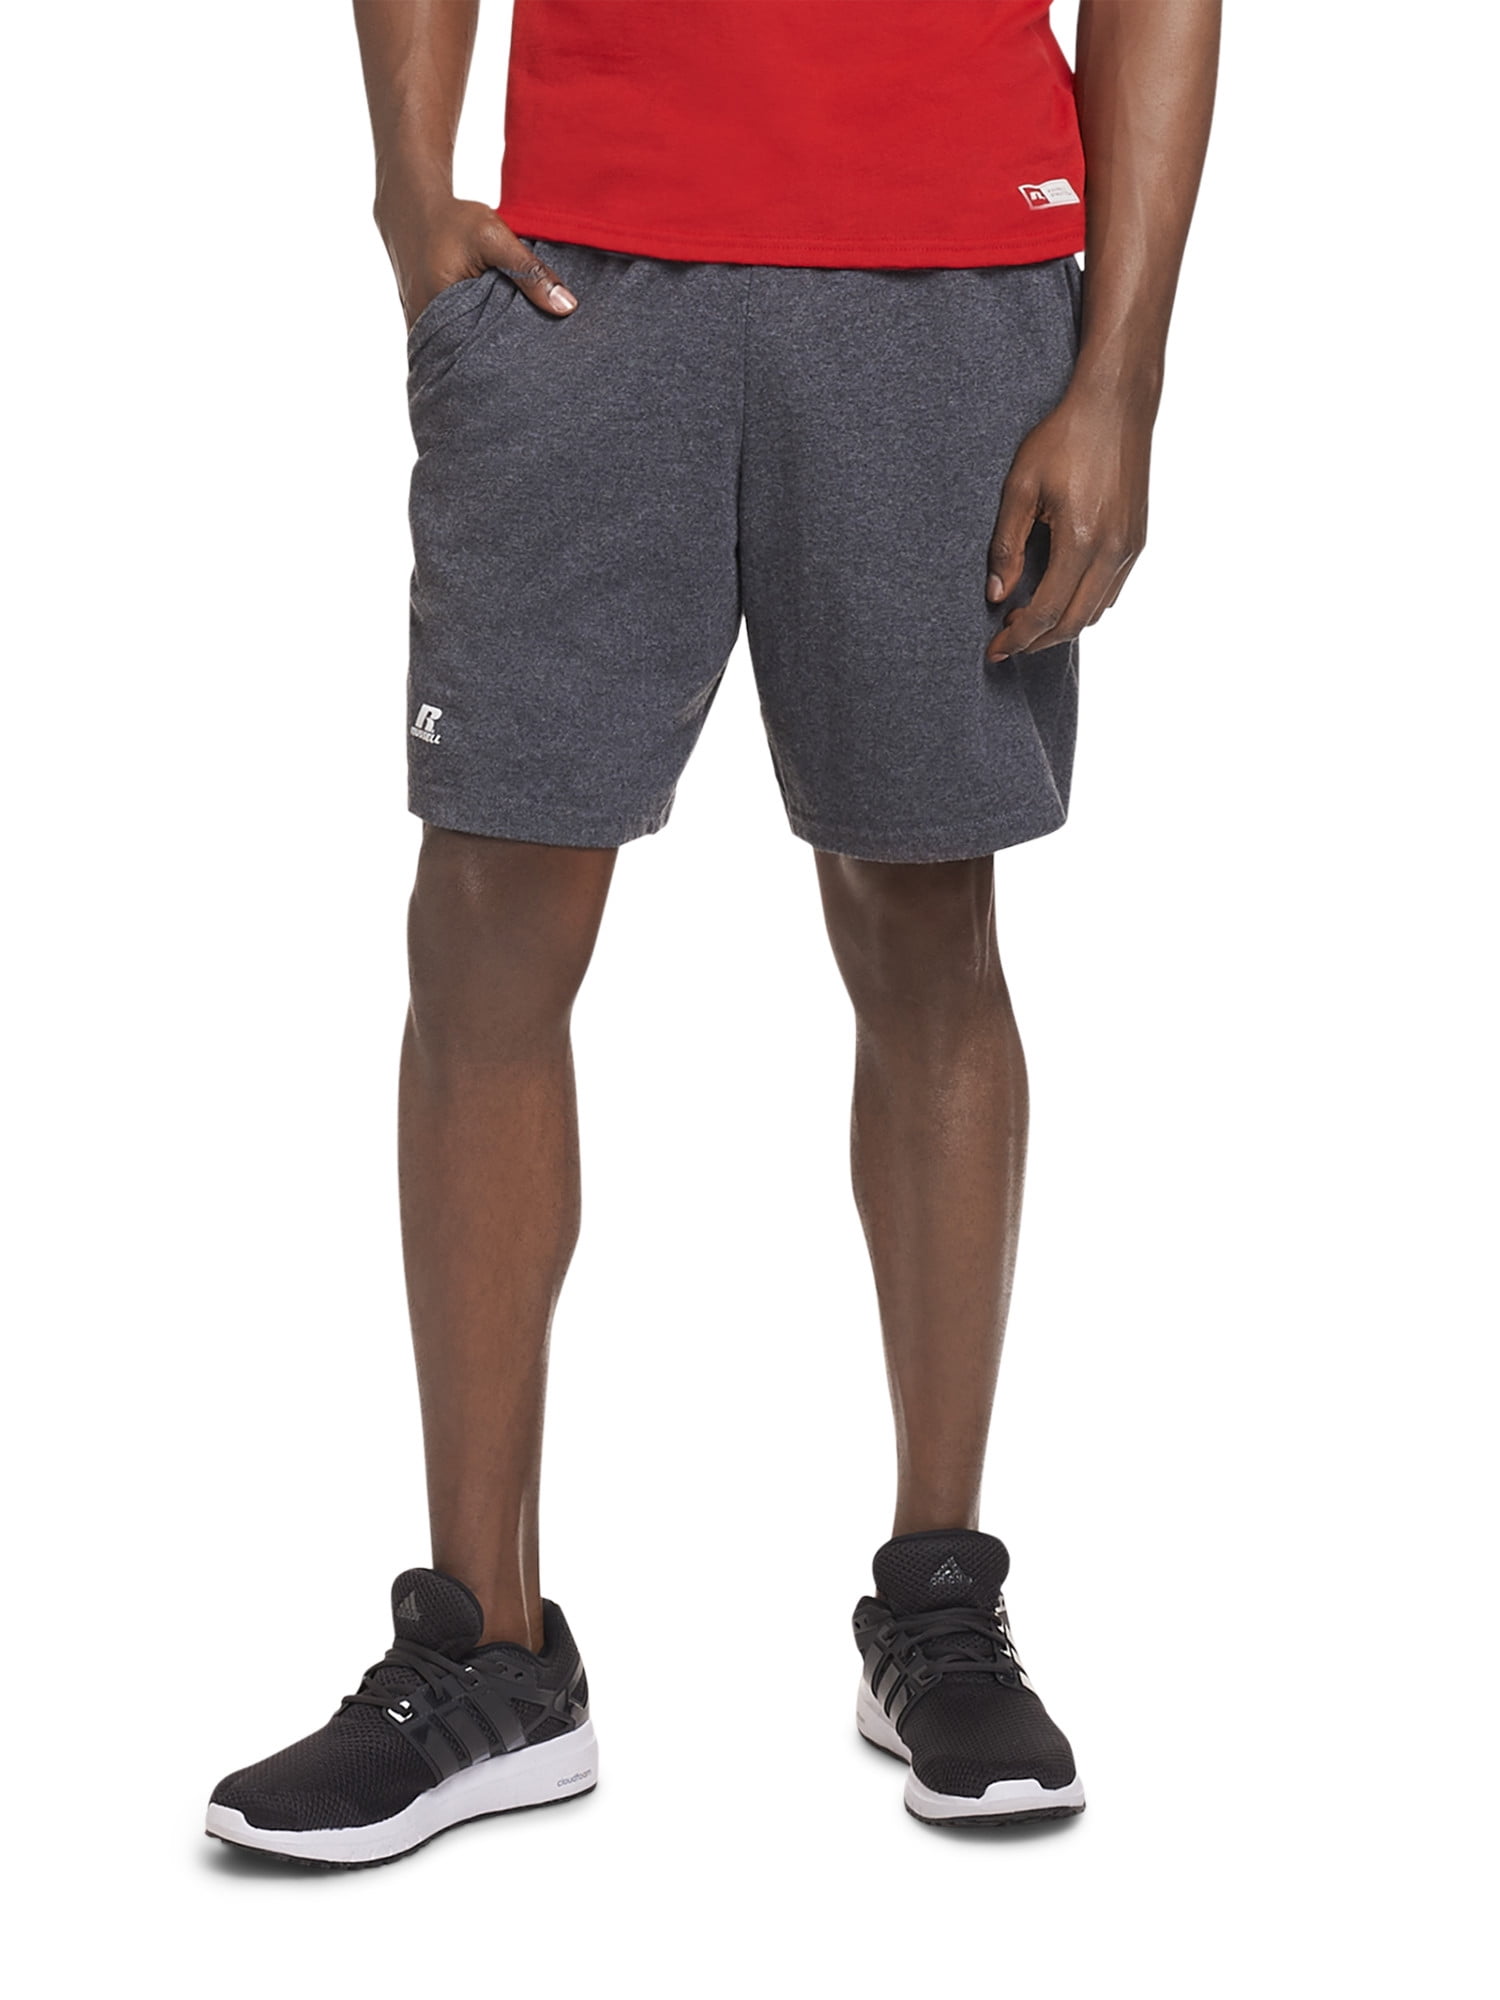 New Russell Athletic Men's Big and Tall Jersey Cotton Lounge Pajama Shorts 